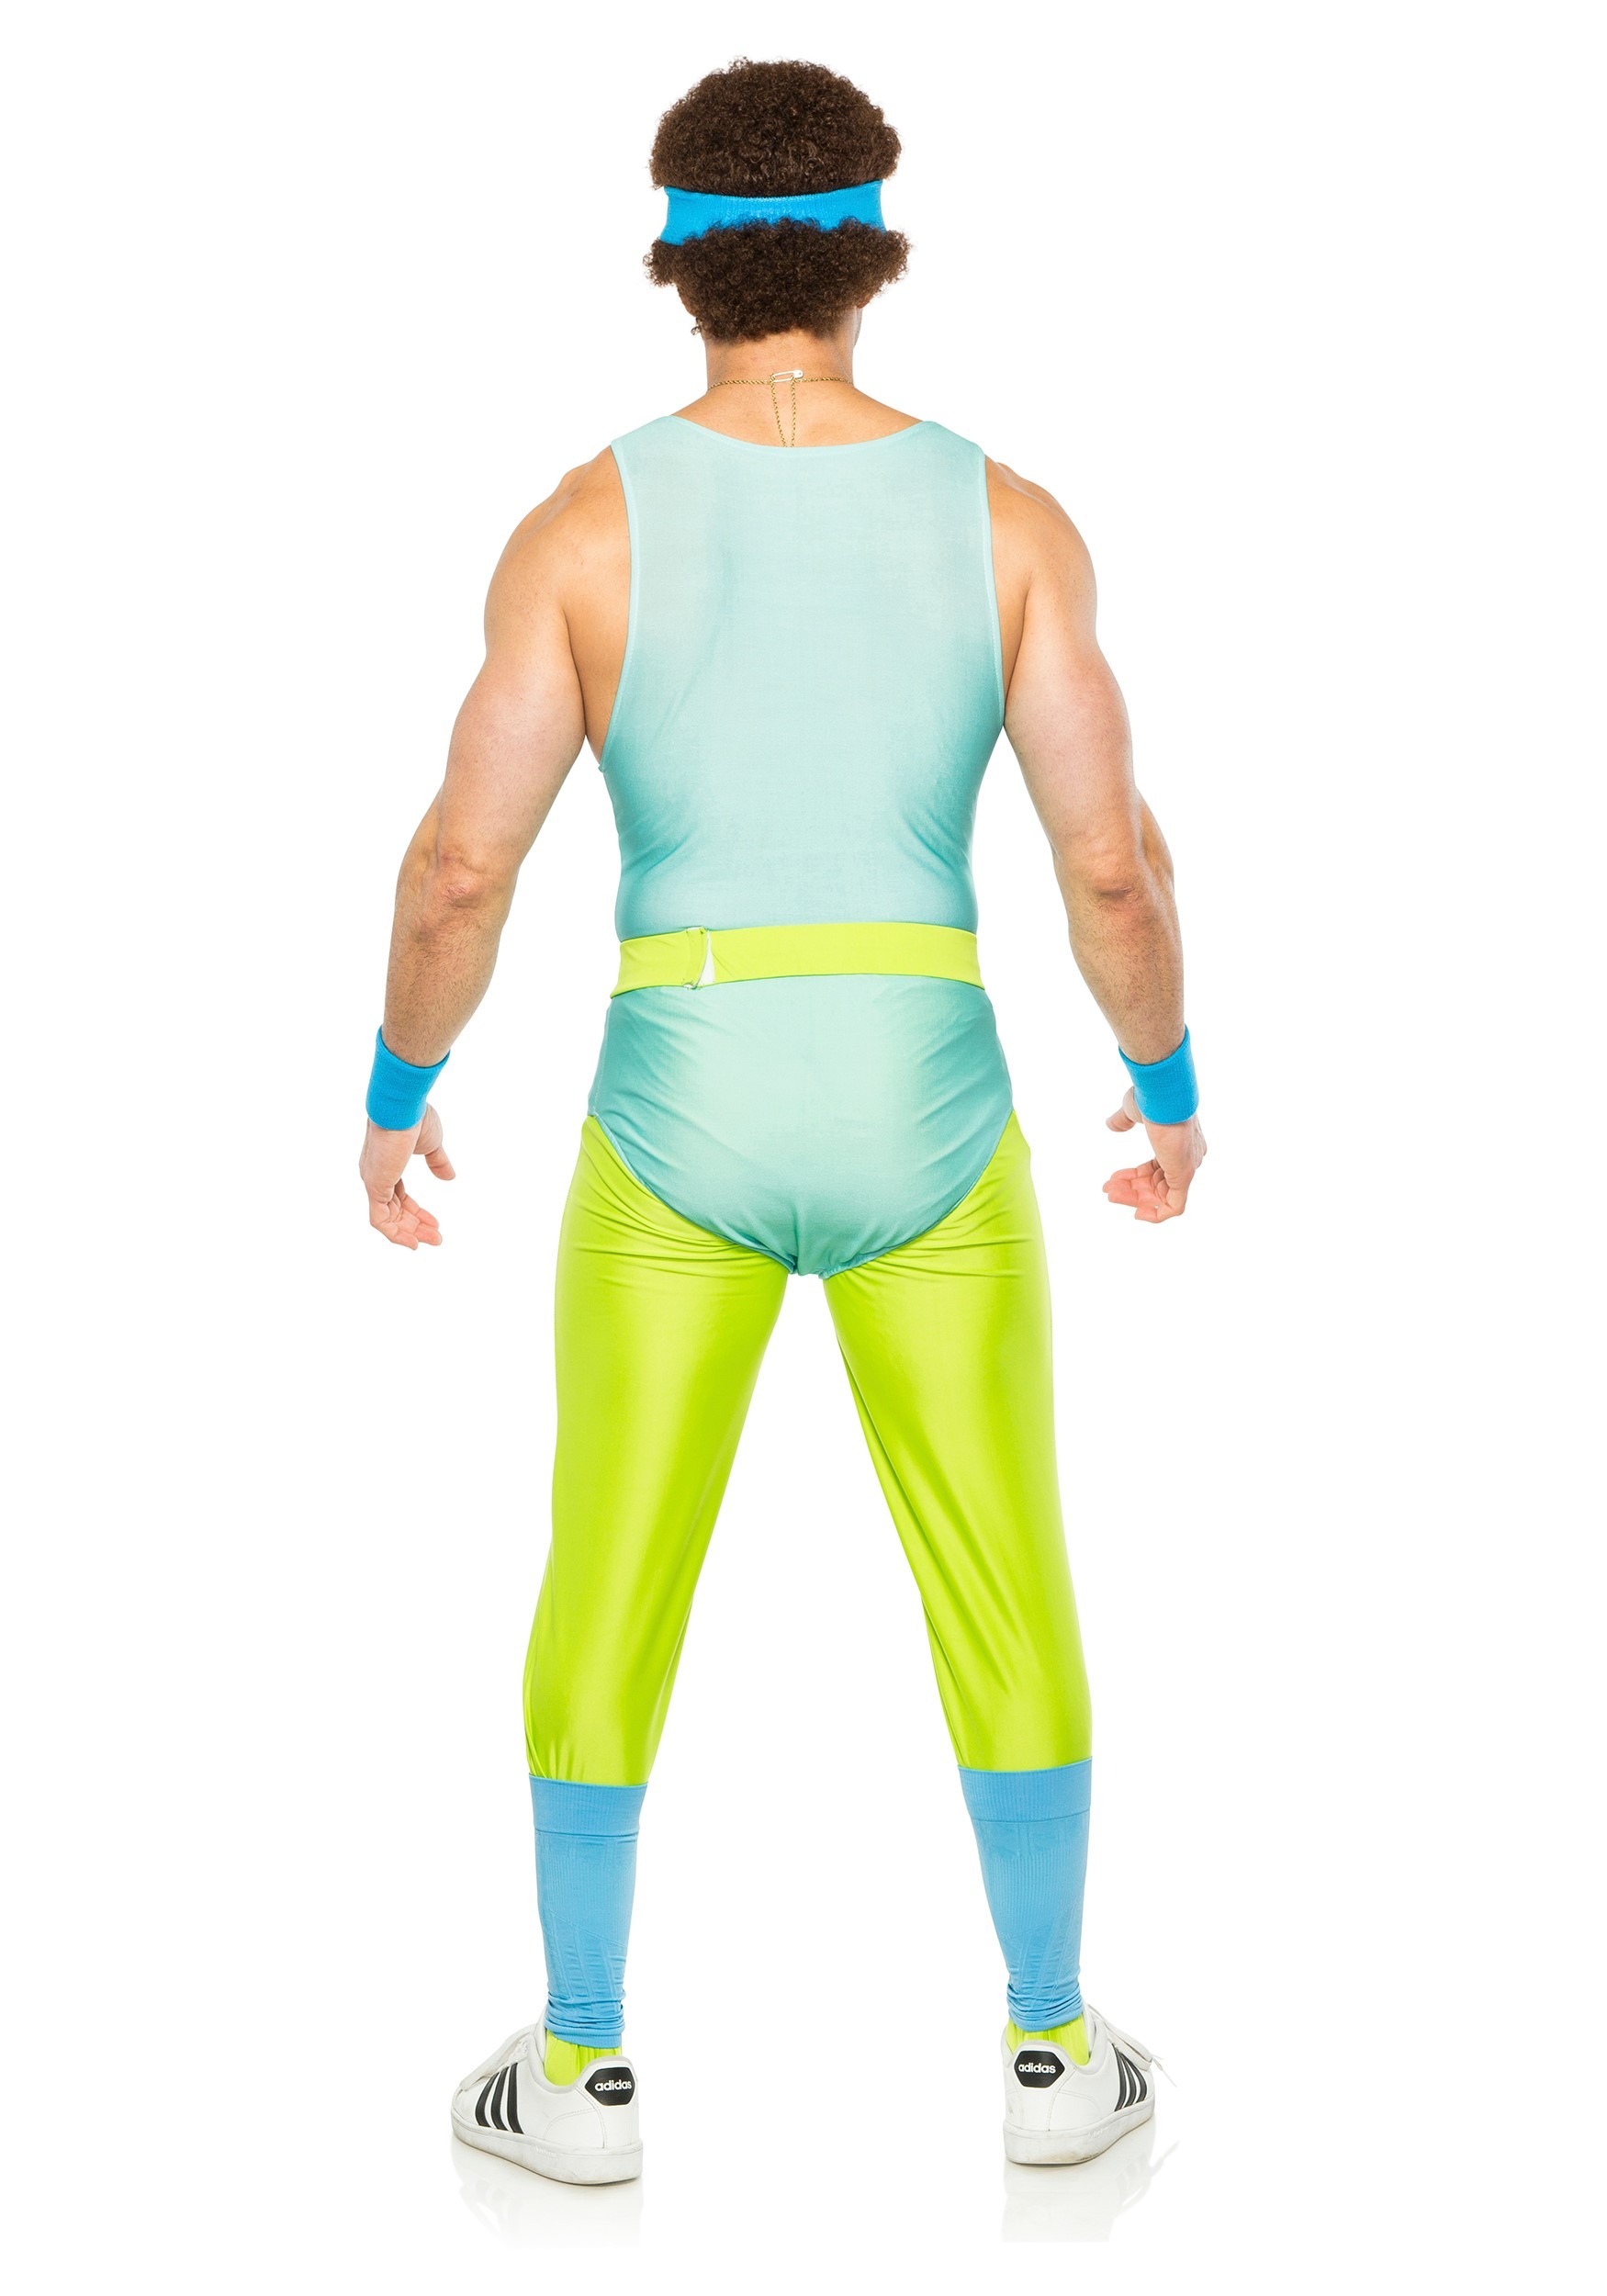 80's Gym Instructor Costume For Men , 80s Workout Costume